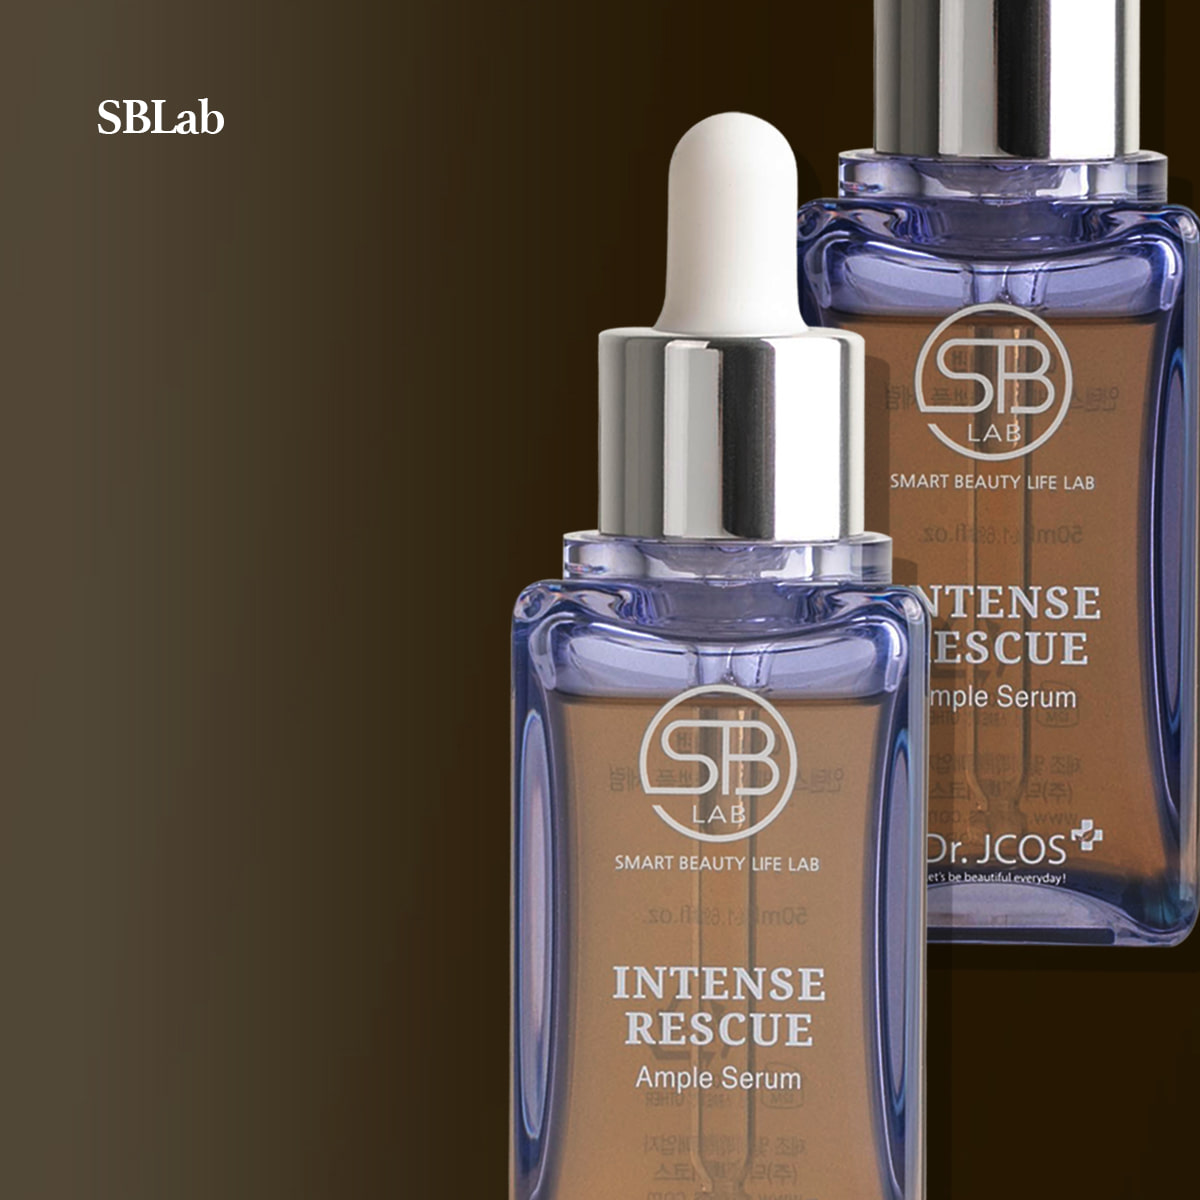 [Highly concentrated AXELATING Essence] SB LAB Intense Rescue Trouble Shot Ampoule Serum.